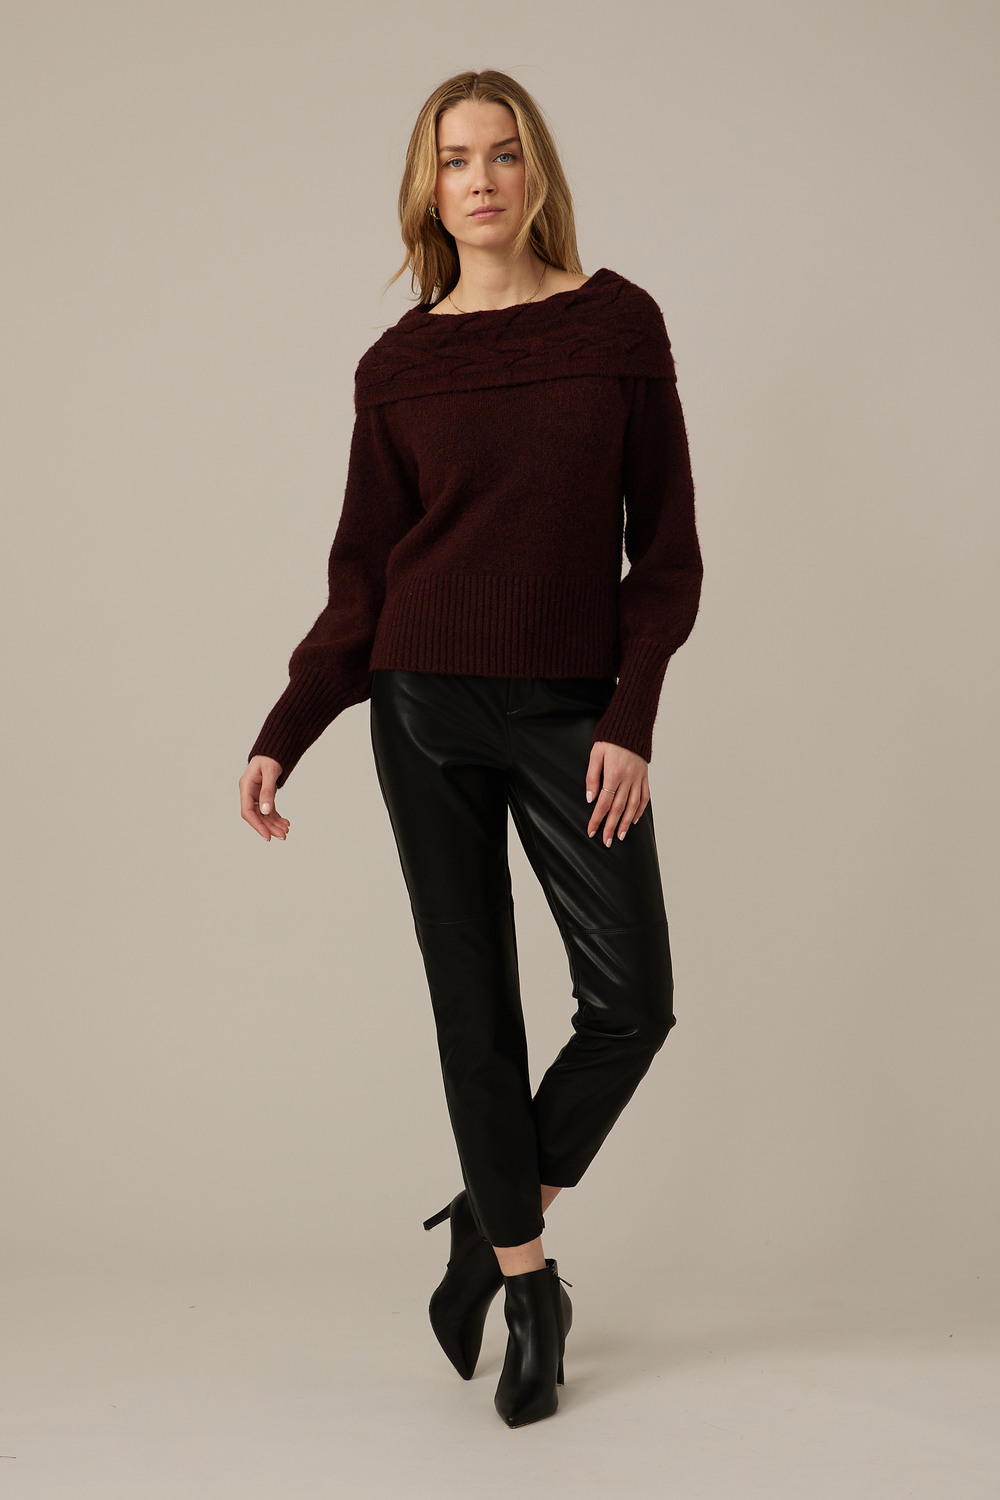 Emproved Textured Knit Sweater Style A2203. Wine